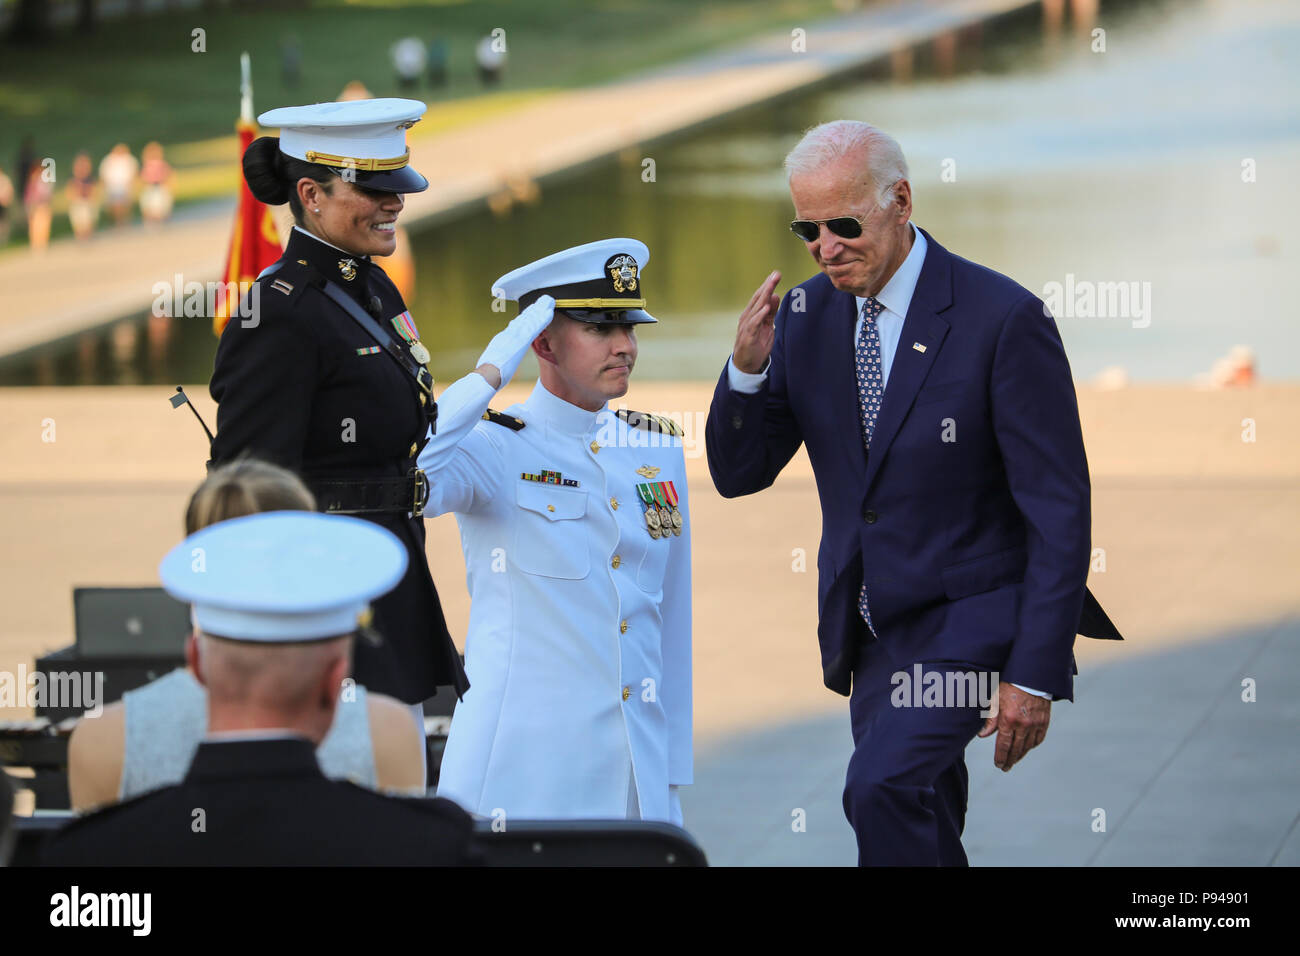 Former Vice President of the United States, Joe Biden, salutes the hosting element as he prepares to take his seat as the guest of honor during a Tuesday Sunset Parade at the Lincoln Memorial, Washington D.C., July 10, 2018.  Biden was the guest of honor and the hosting official was the Staff Judge Advocate to the Commandant of the Marine Corps, Maj. Gen. John R. Ewers Jr. (Official Marine Corps photo by Cpl. Damon Mclean/Released) Stock Photo